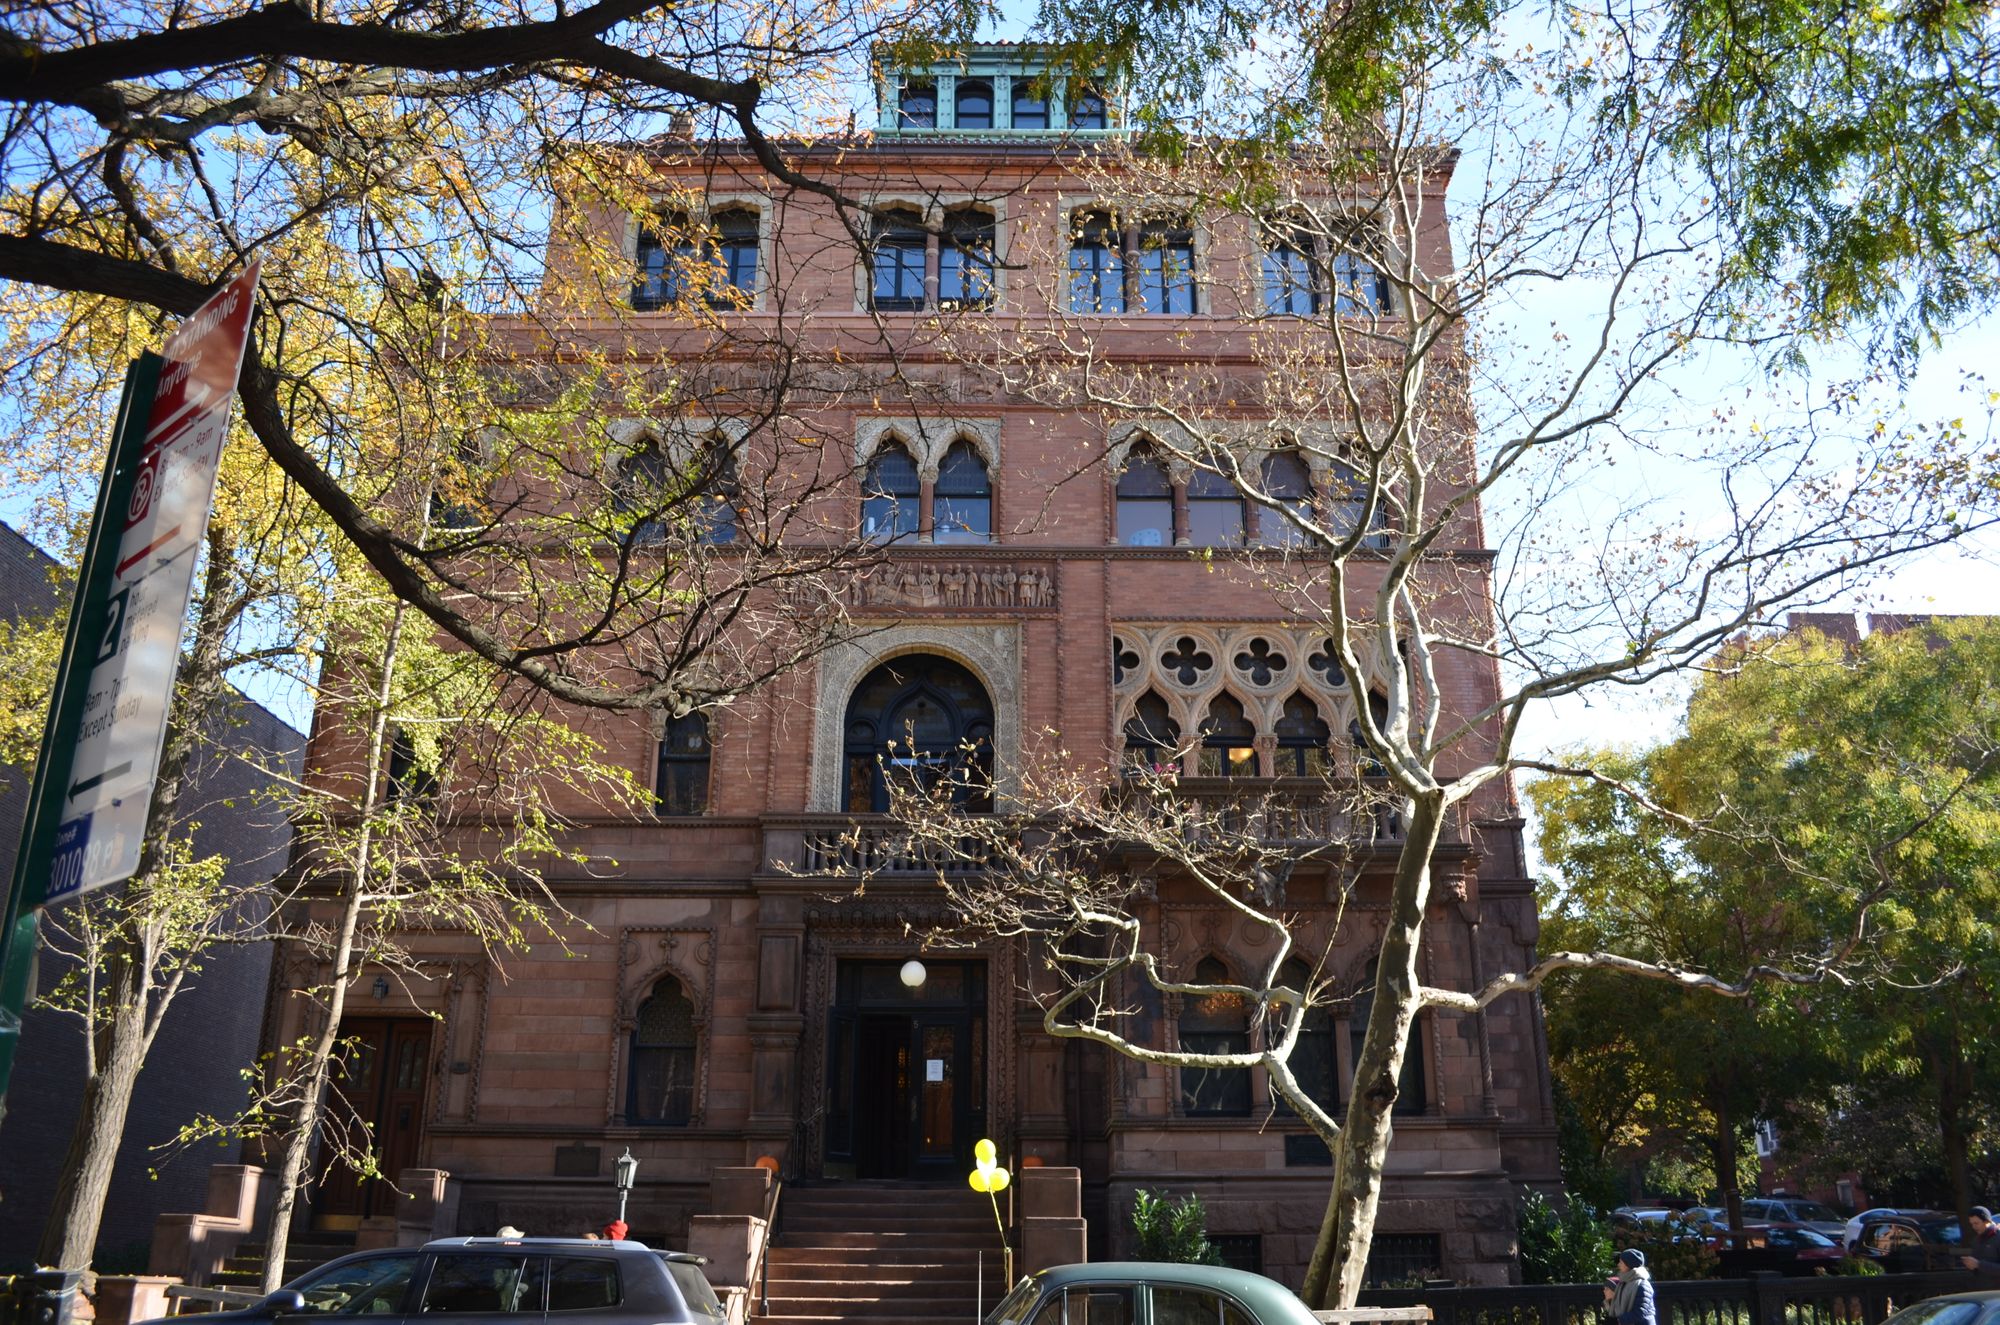 Save The Date: 59th Annual Park Slope House Tour, Sunday, May 20